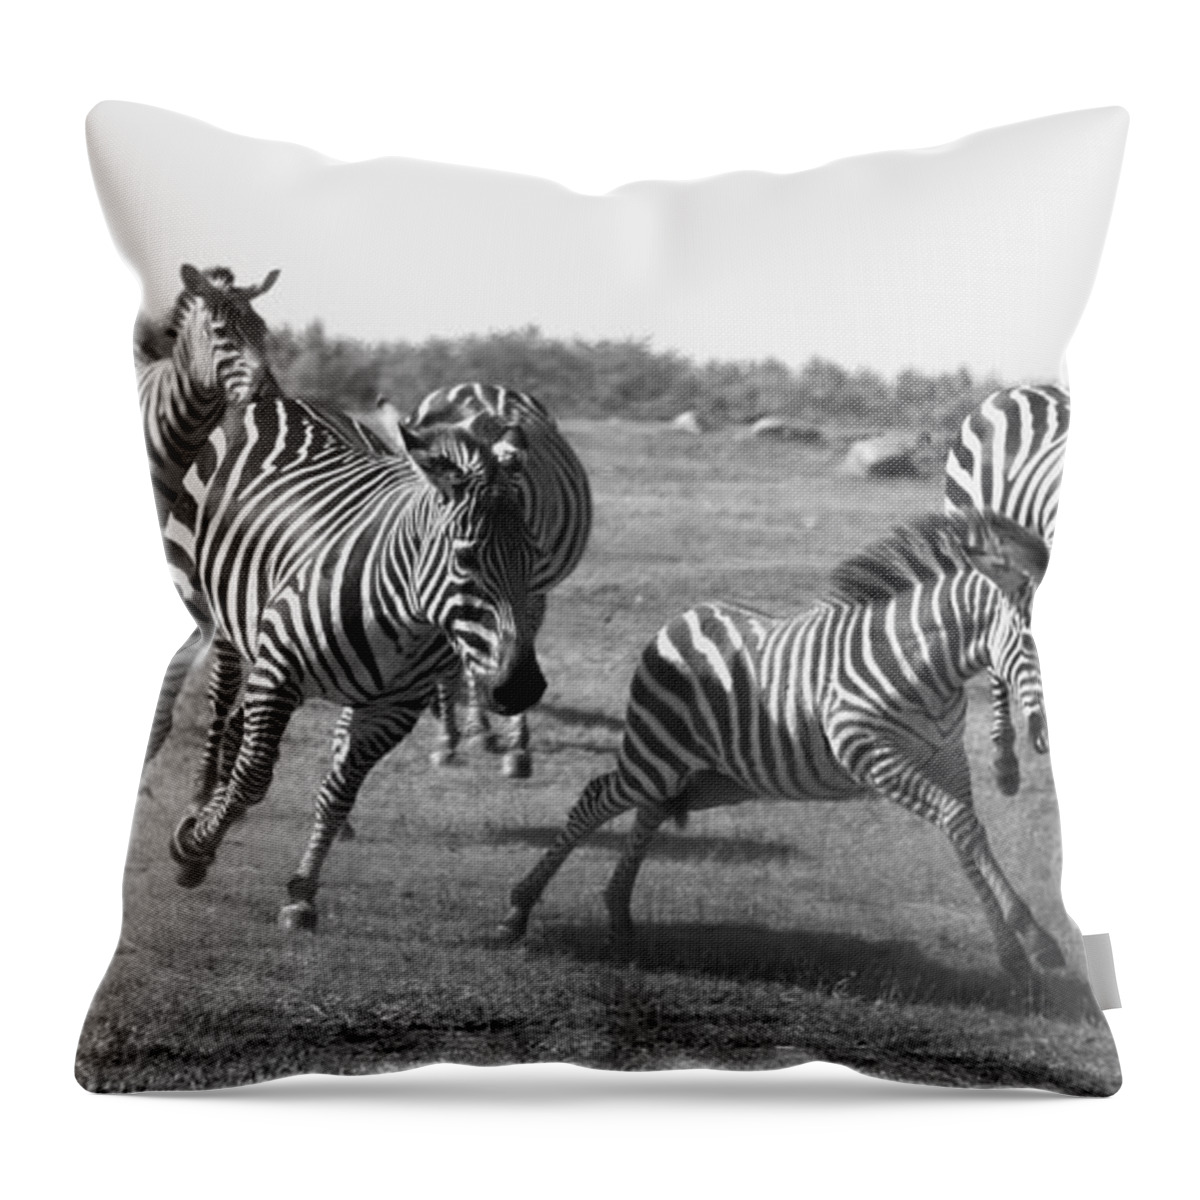 Racing Zebras Throw Pillow featuring the photograph Racing Zebras 1 by Tracy Winter